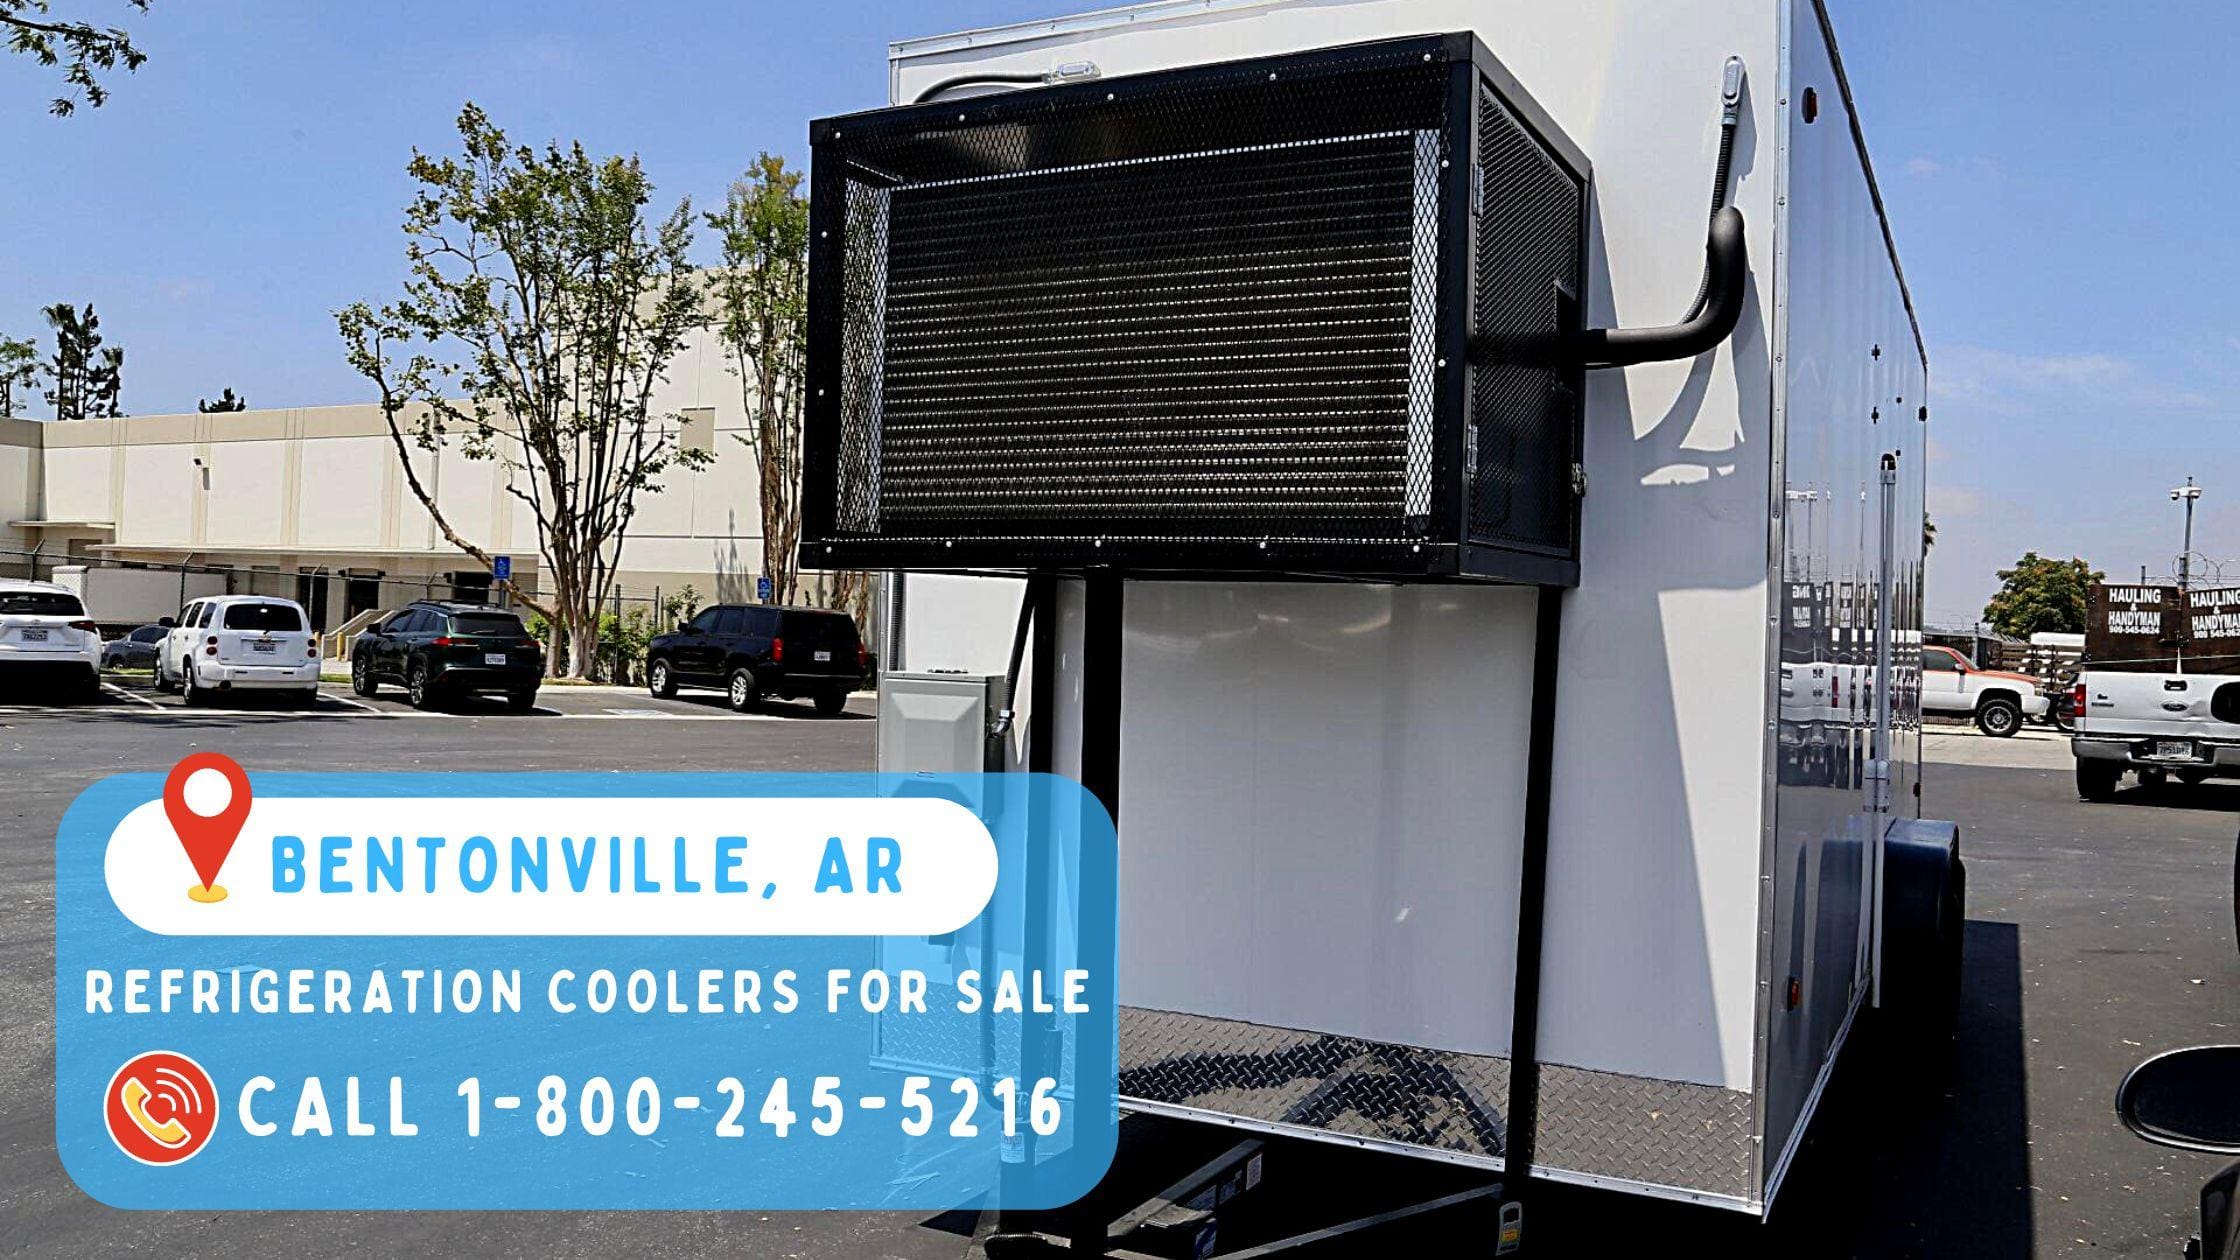 Refrigeration Coolers for Sale in Bentonville, AR